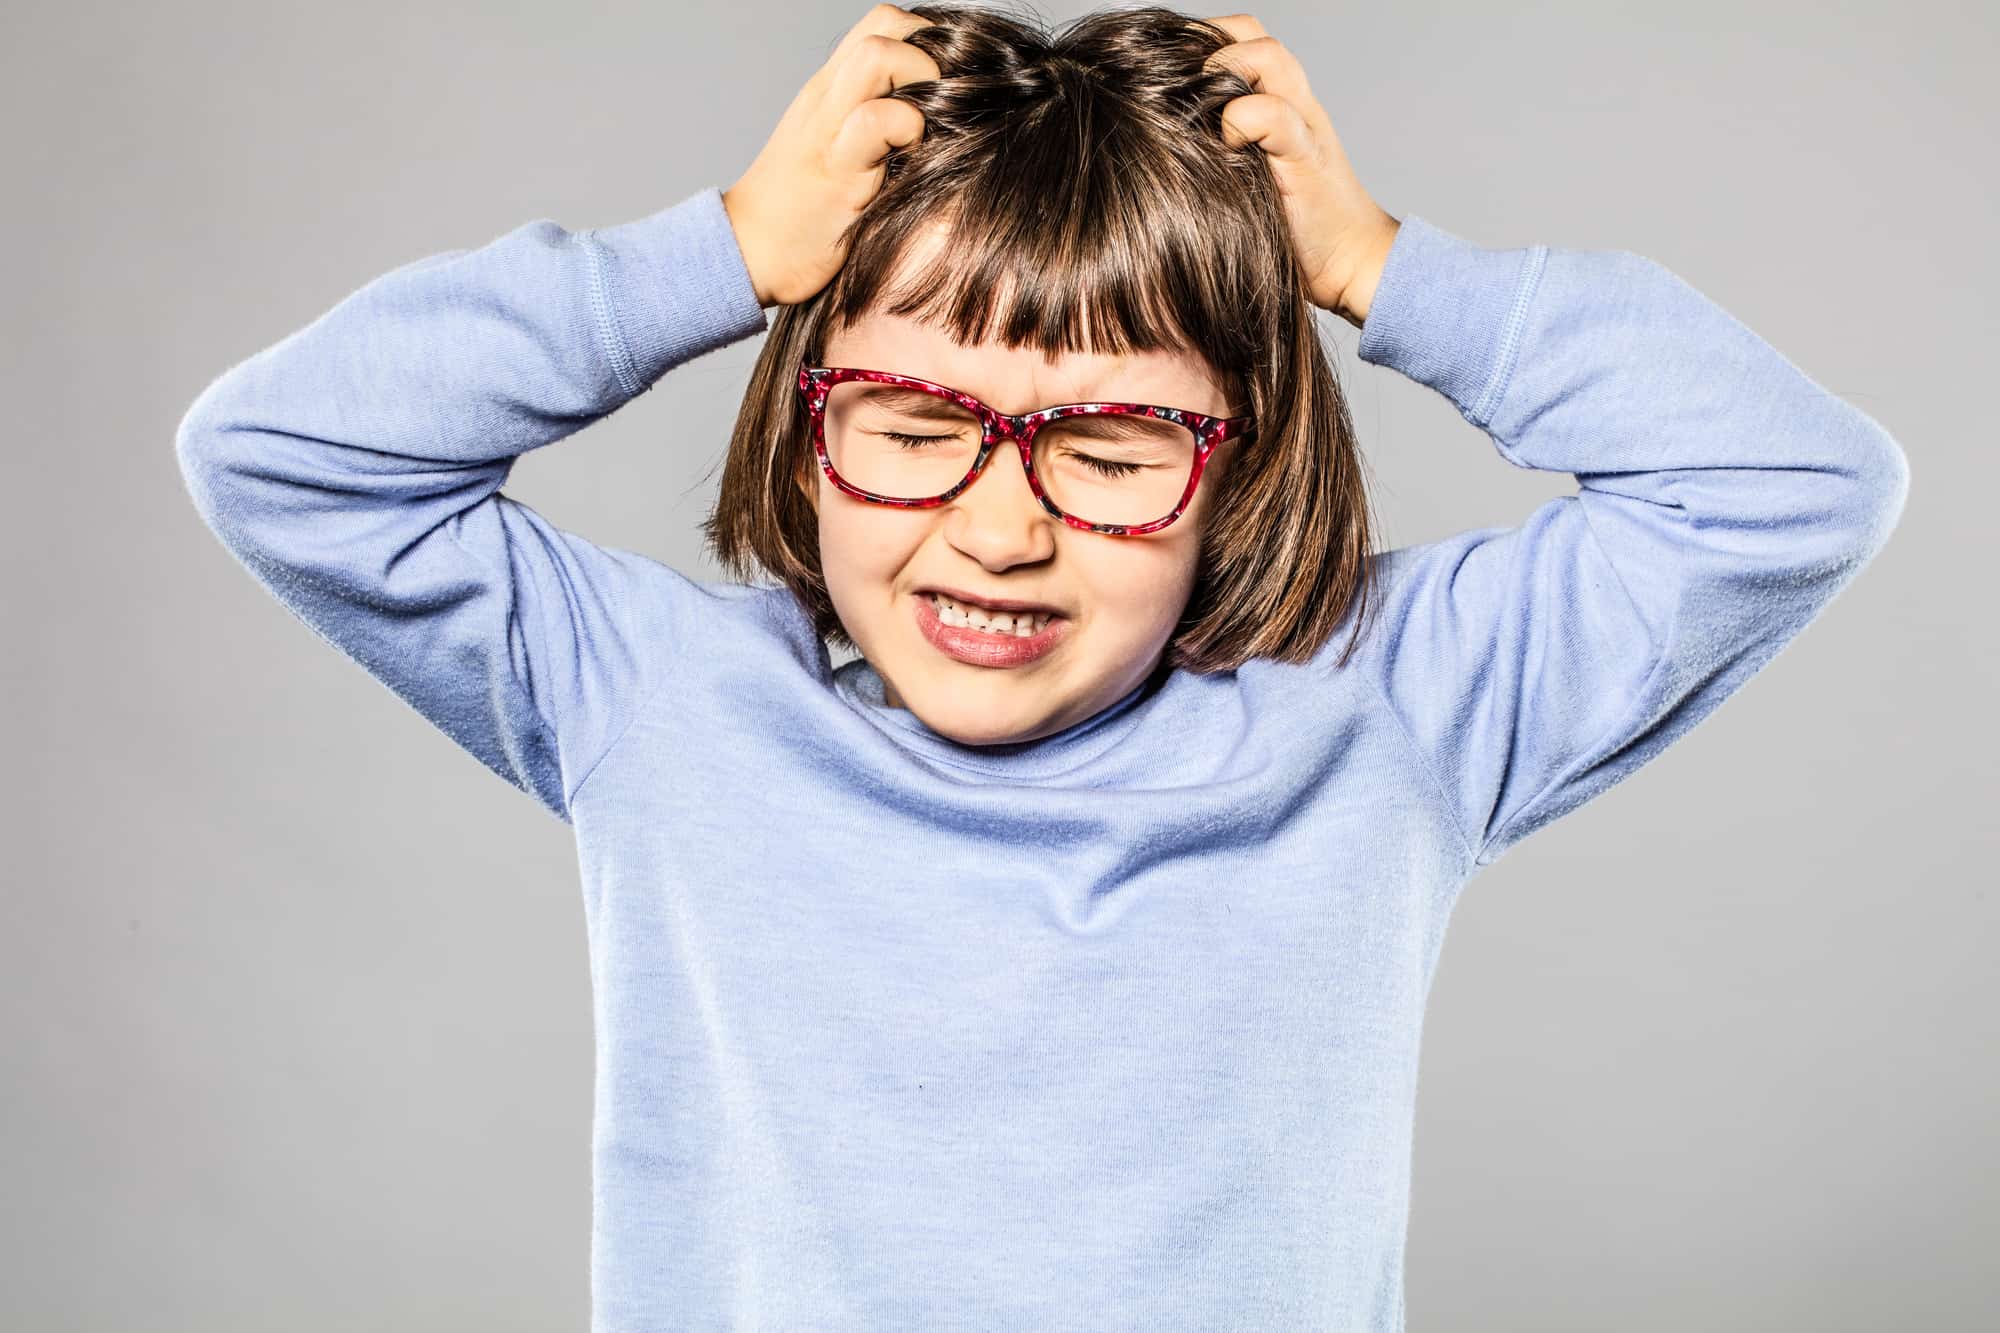 irritated 6-year old young girl with eyeglasses pulling out her hair for itchy allergies or lice or scratching her head 